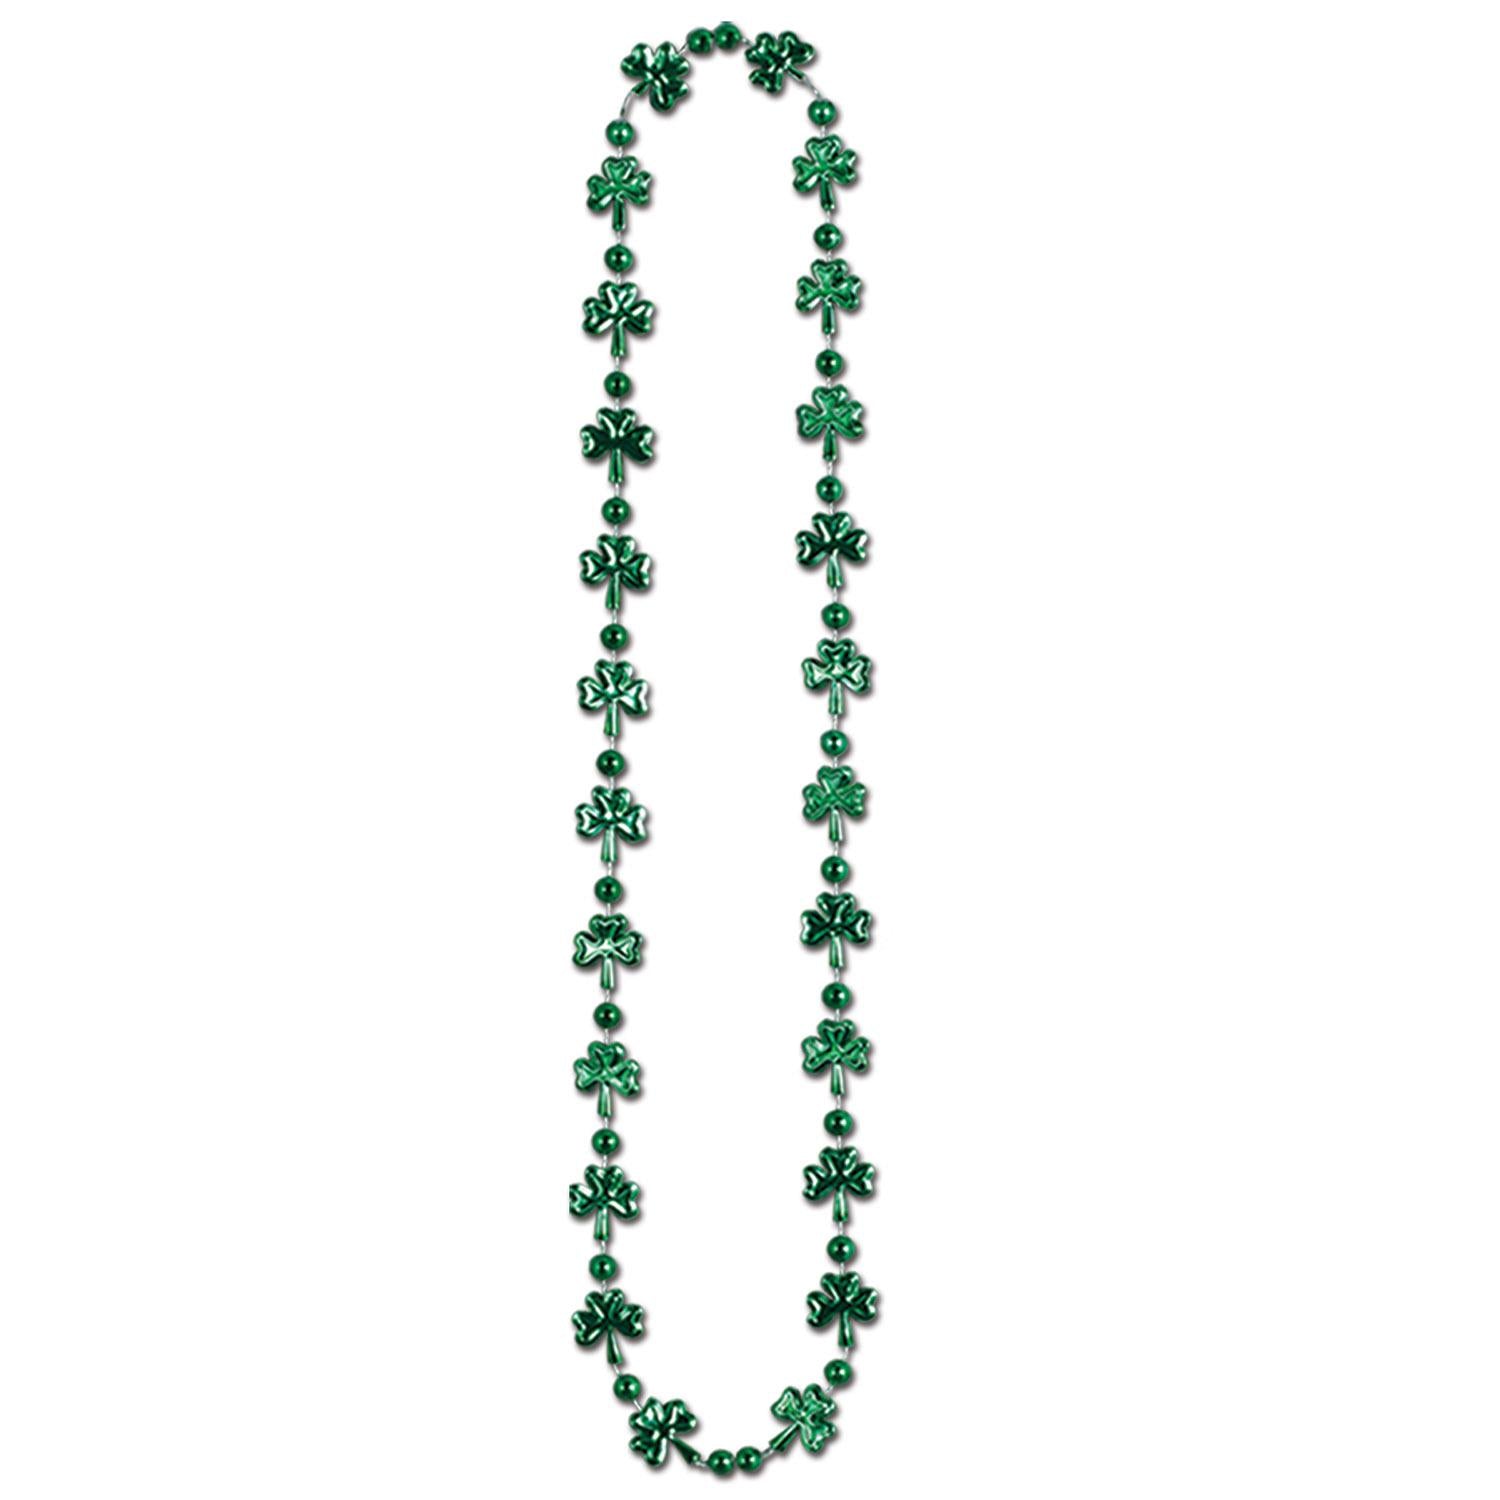 St. Patrick's Day Shamrock Bead Necklaces (12 Bead Necklaces/Case)